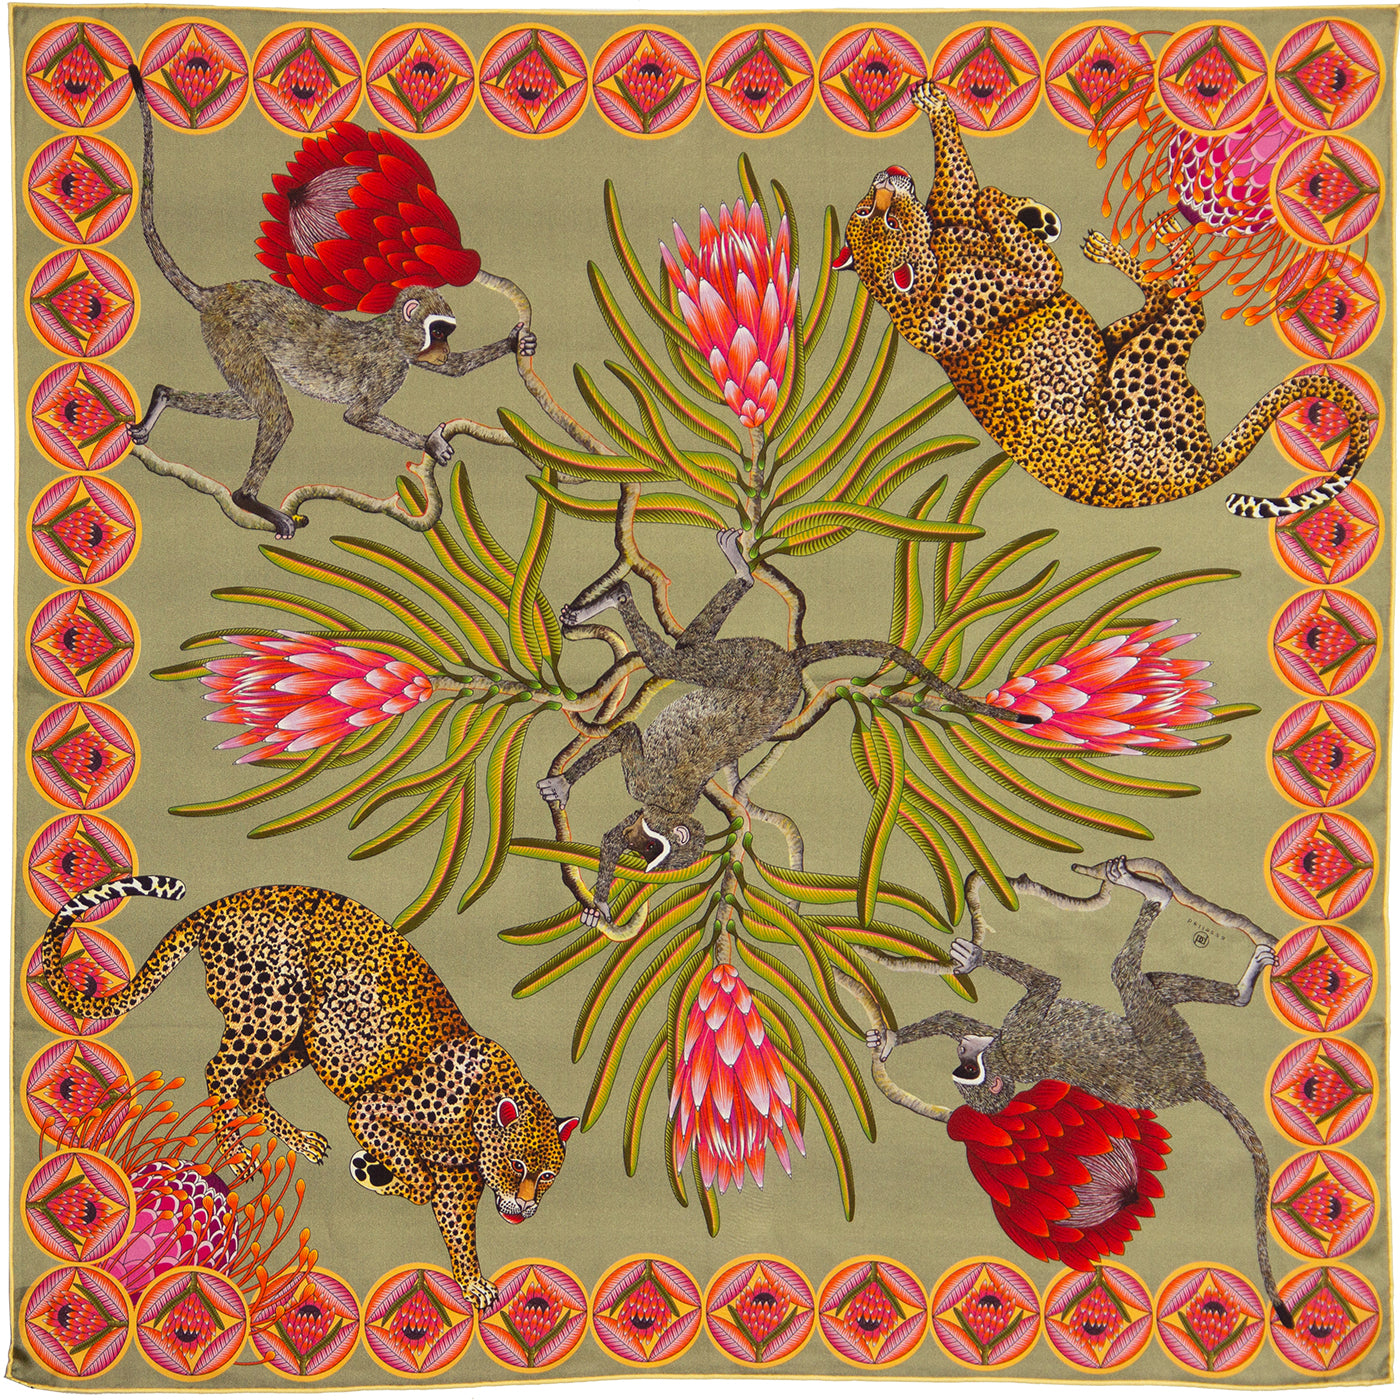 Black and olive silk scarf with Leopards & Monkeys & Protea flowers